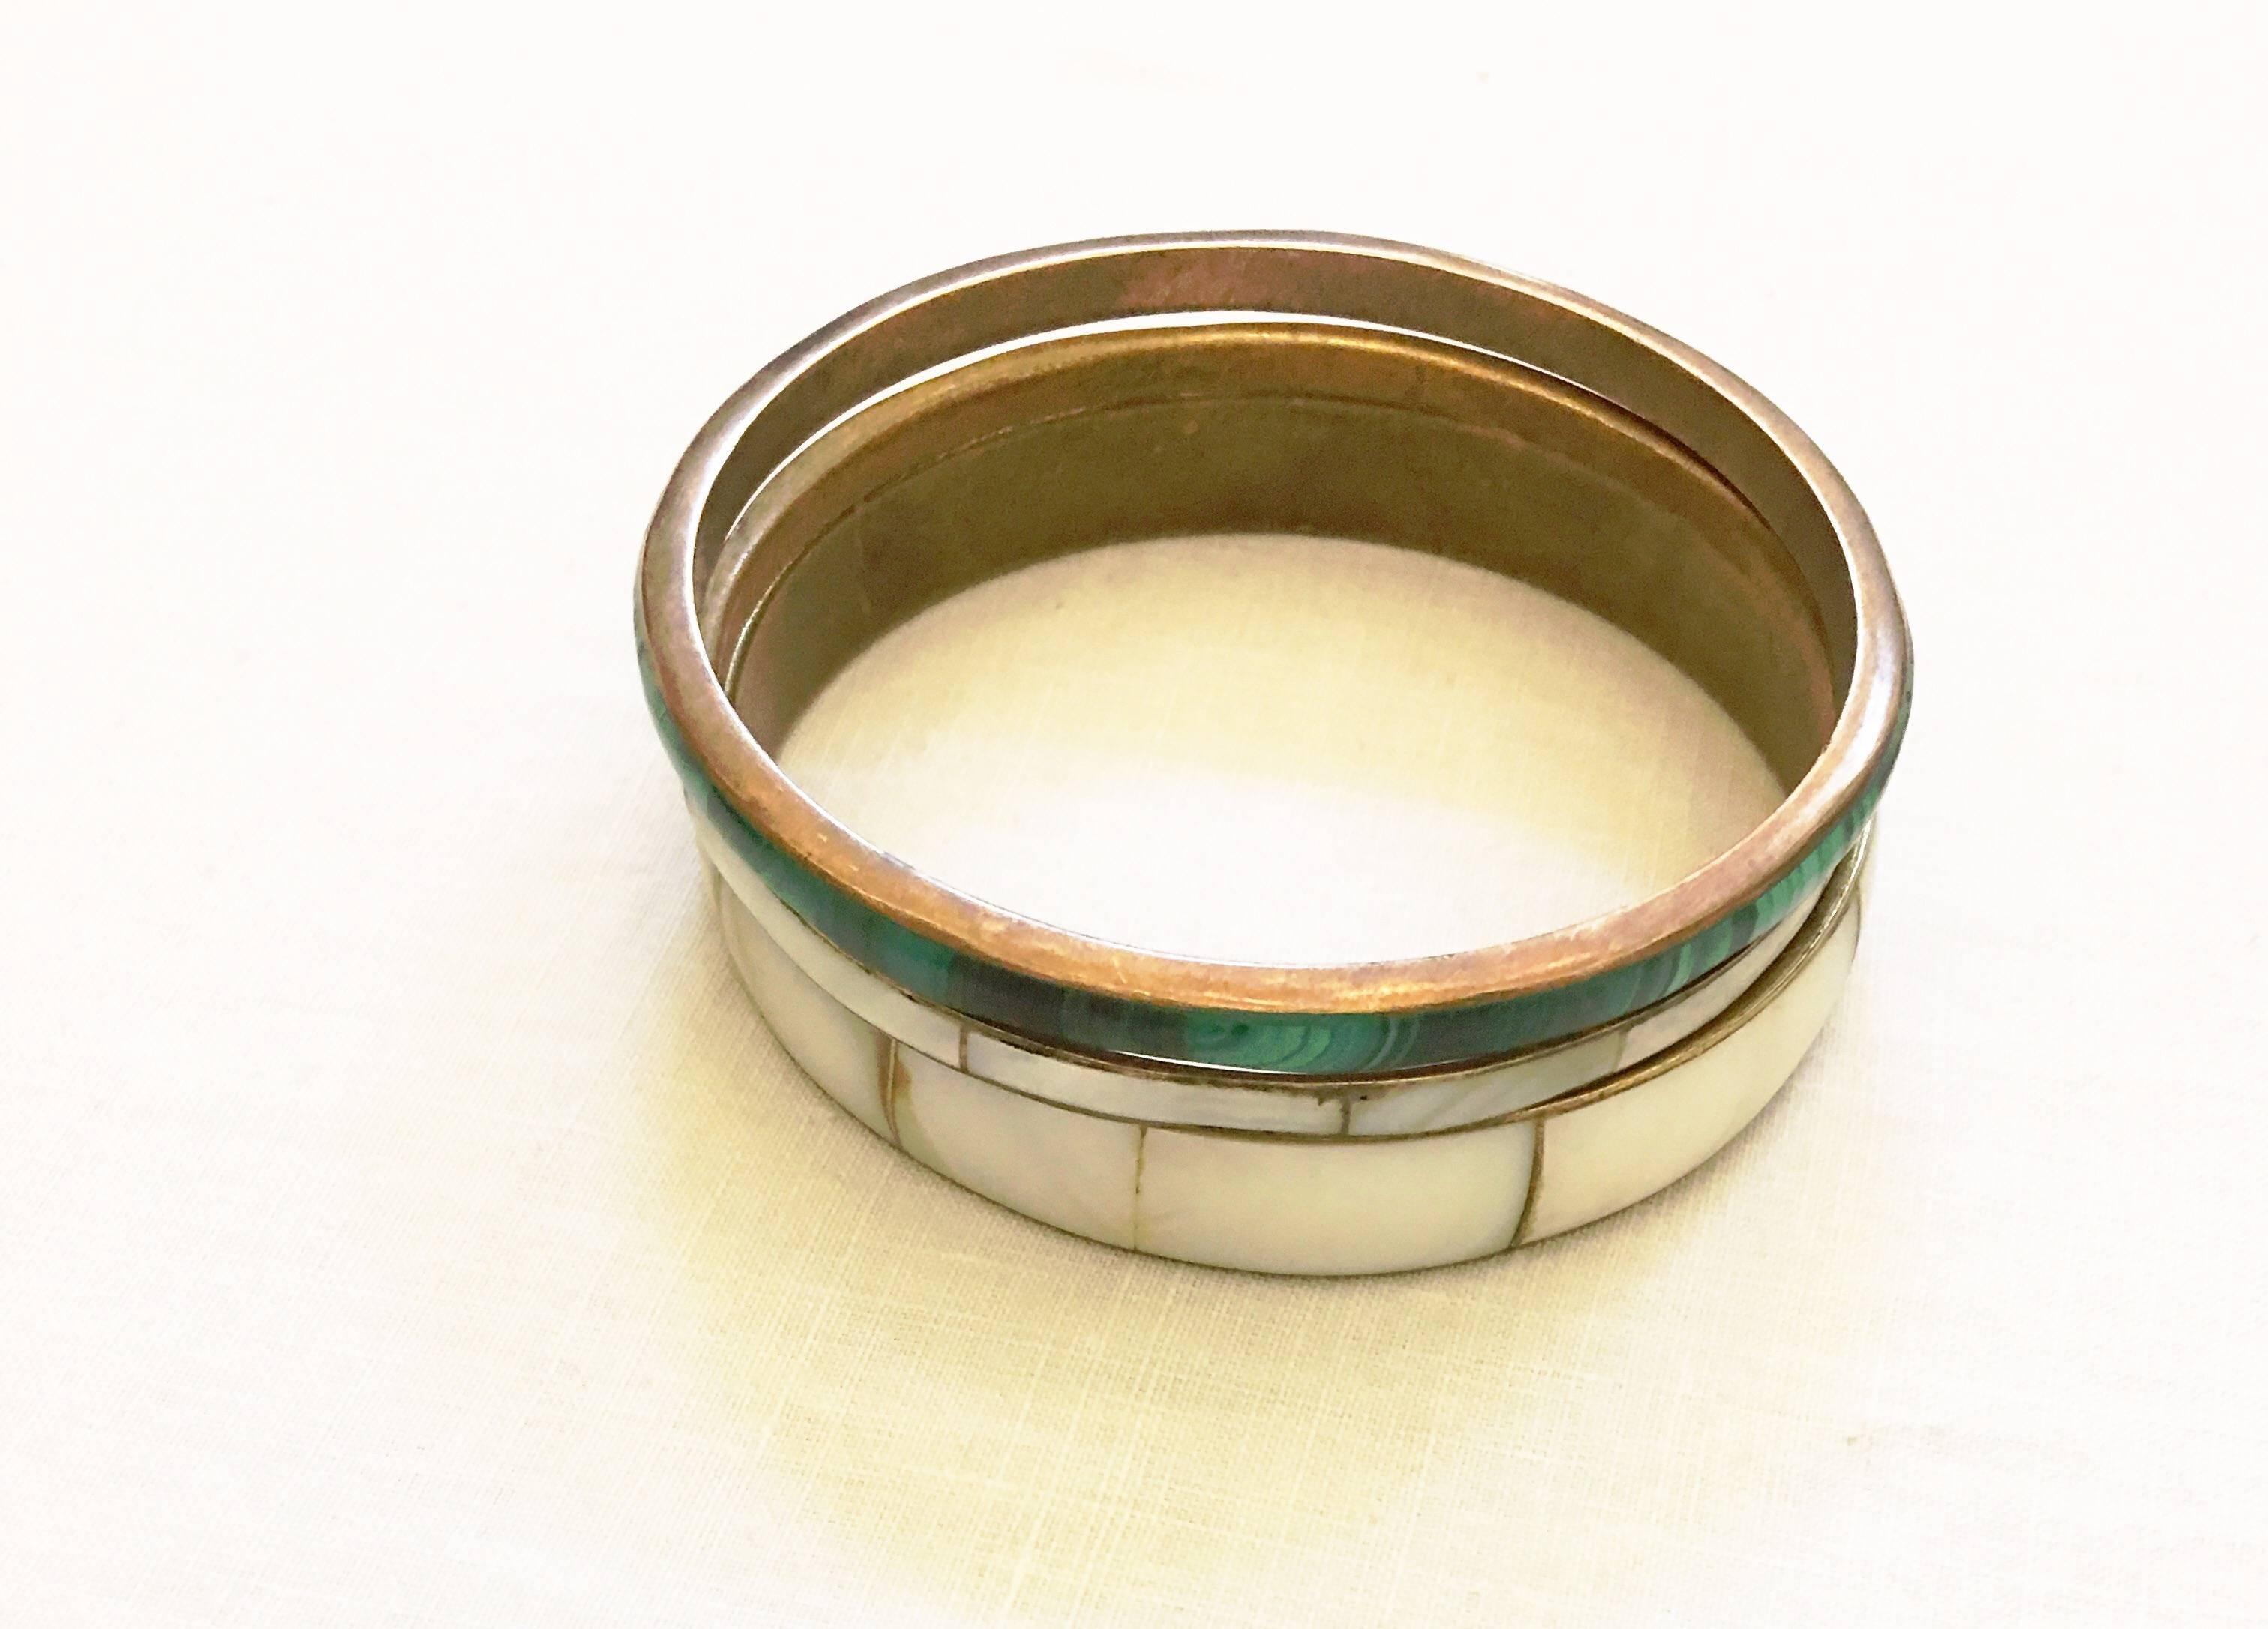 Set of five bangles- four abalone and two malachite. Malachite bangles are .2 inches in width and there are two abalone bangles of the same width and two that are thicker at .5 inches. 